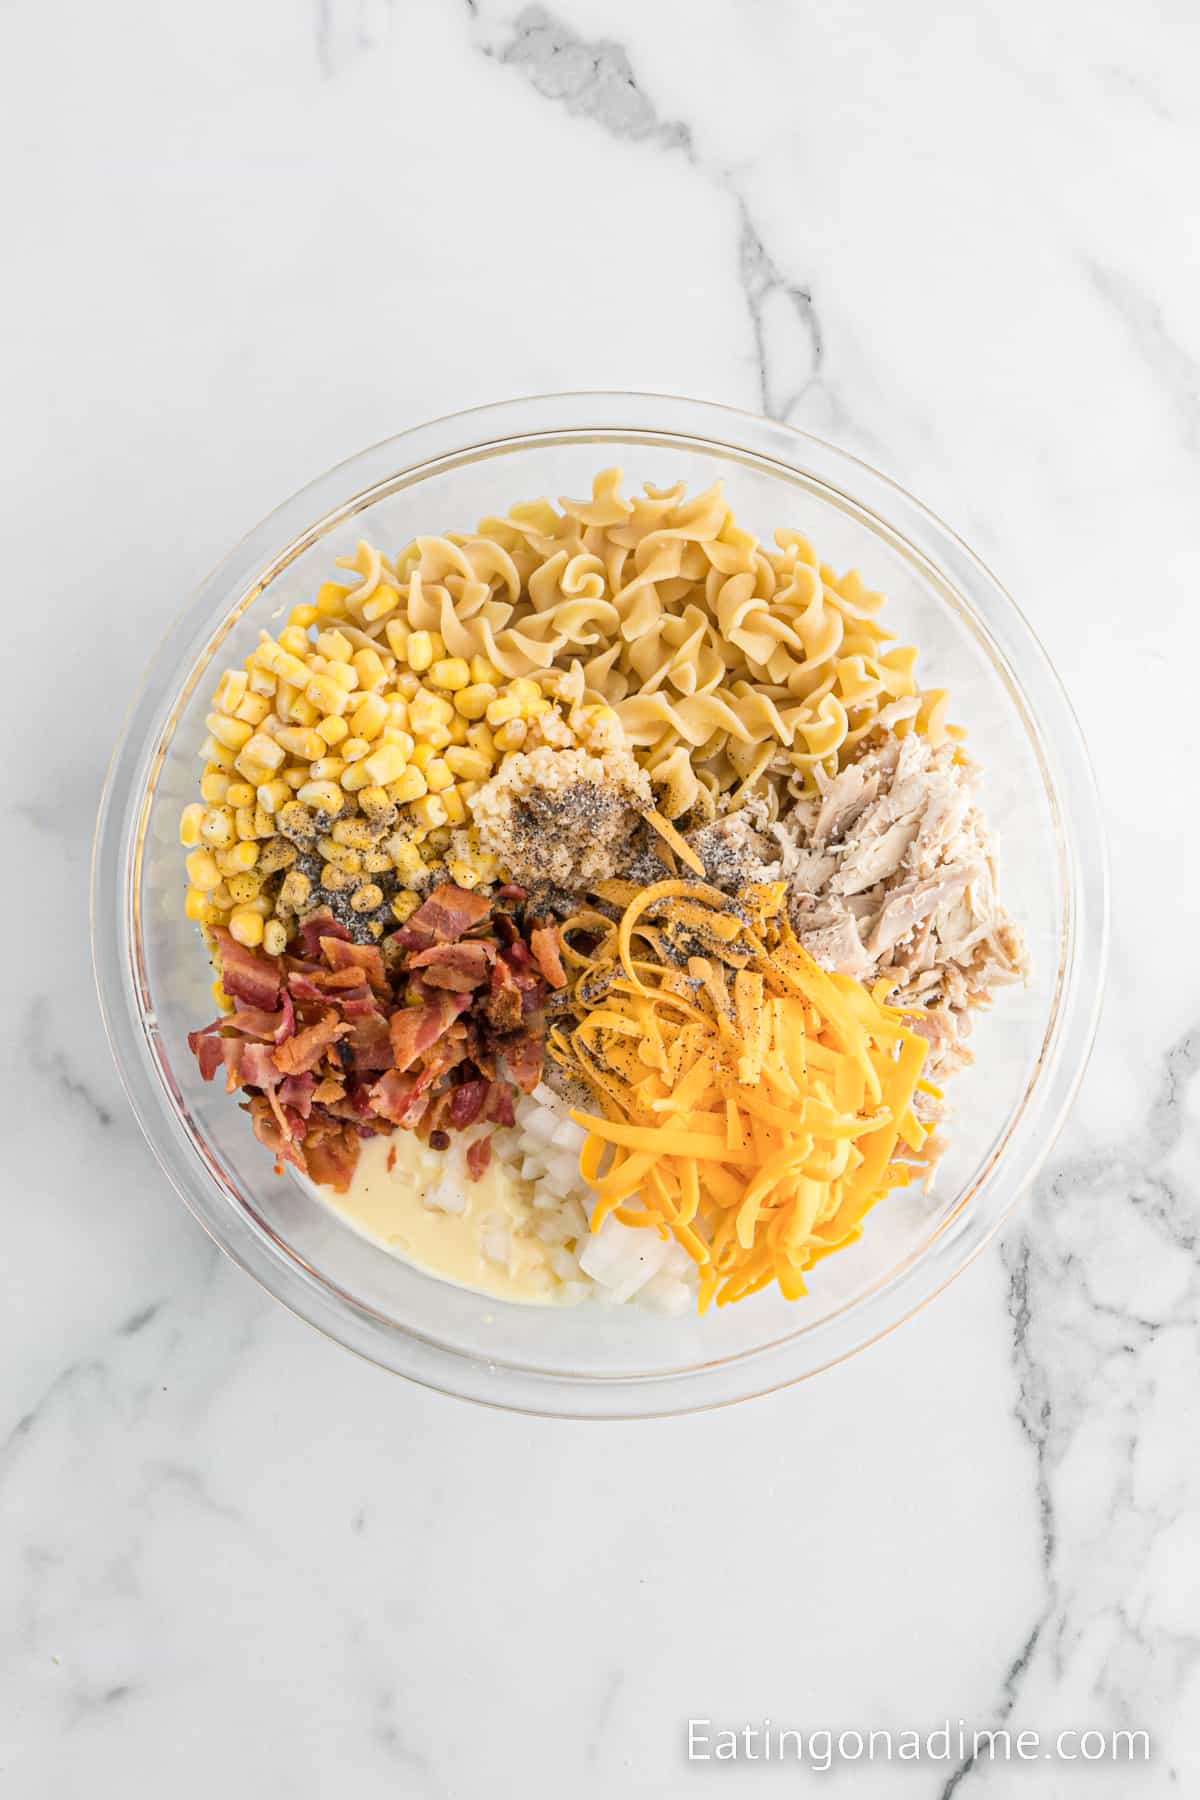 Chopped bacon, shredded chicken, shredded cheese, egg noodles, corn, seasoning mixed together in a bowl